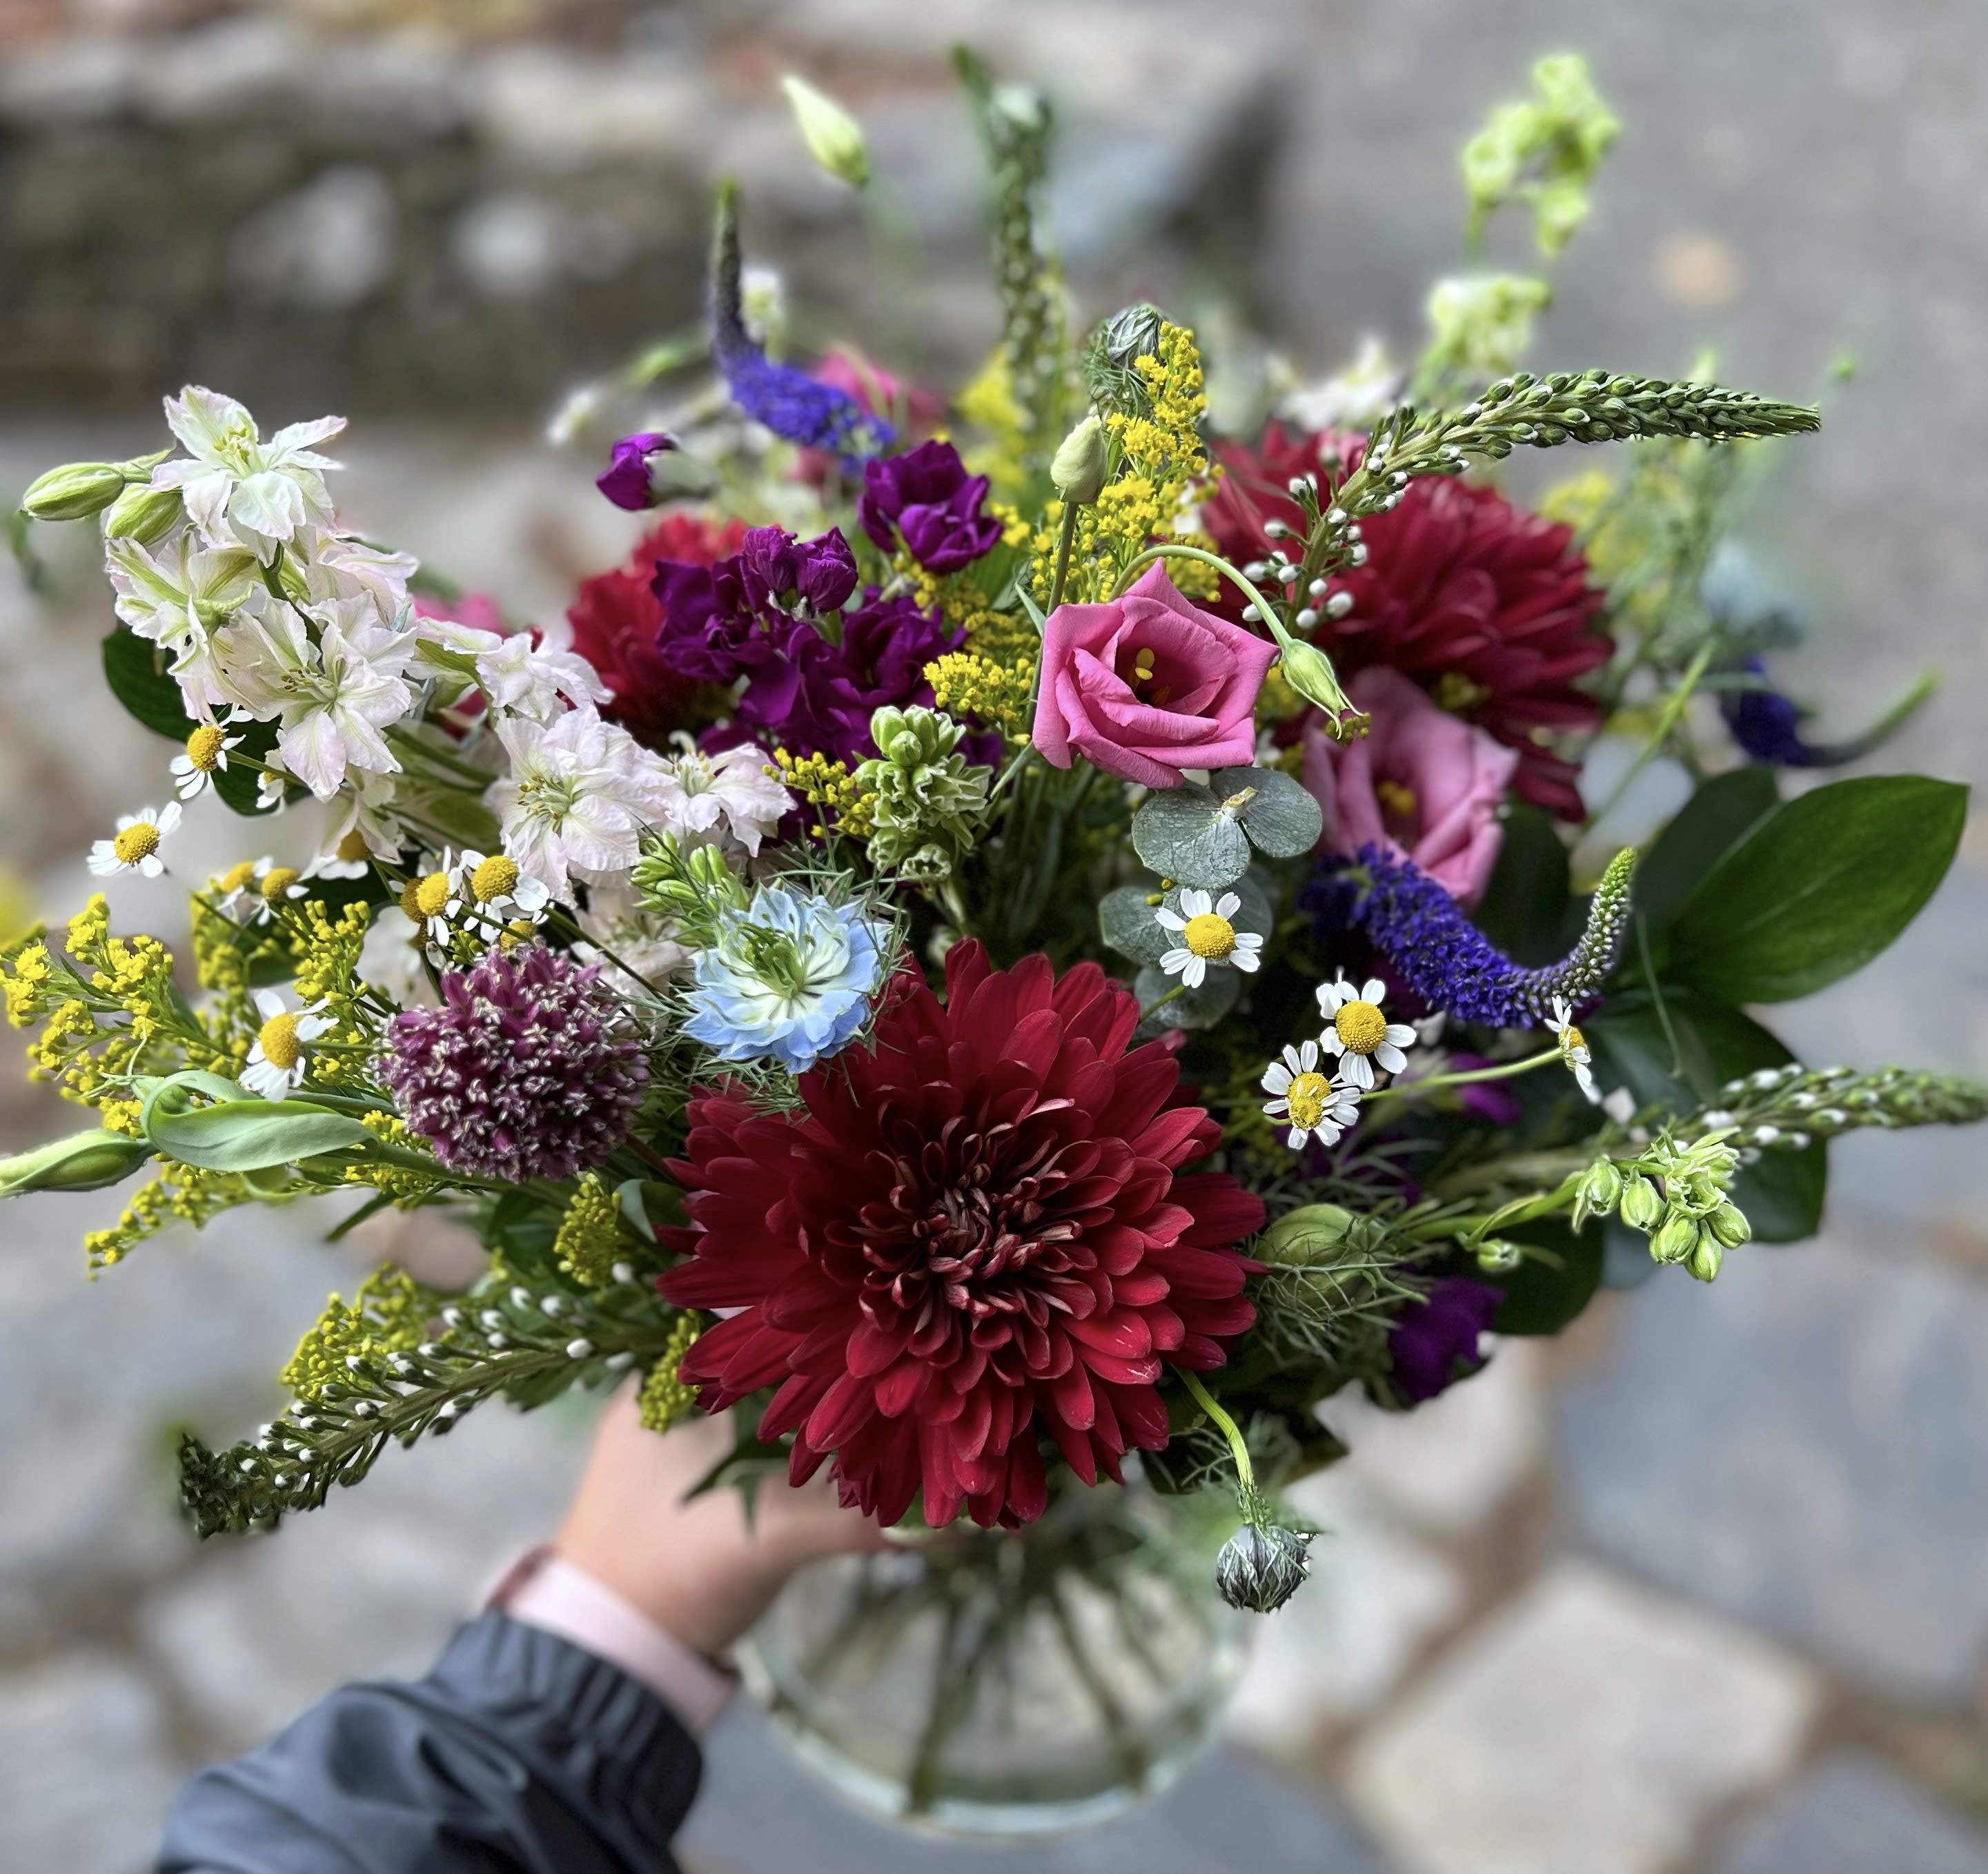 Burgundy Beauty - Lush bouquet is full of color! Mums, stock, lisianthus, Veronica, solidago, eucalyptus to name a few.  Design varies upon availability and sizing. Premium product is shown. The actual product may differ slightly to the photo but will match its size and theme.